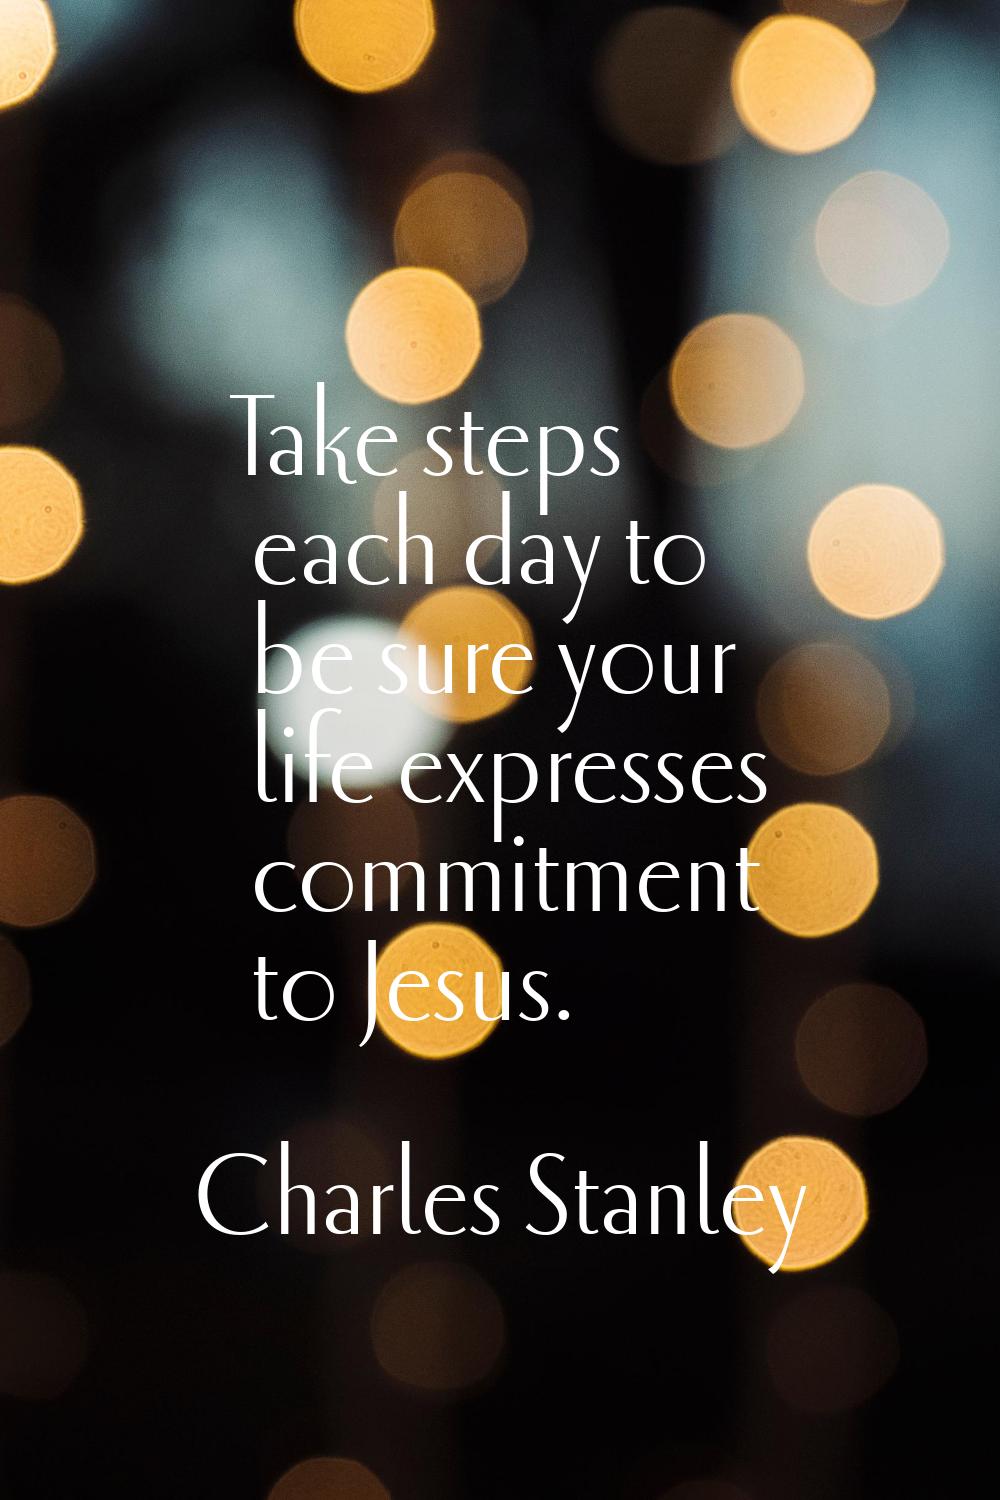 Take steps each day to be sure your life expresses commitment to Jesus.